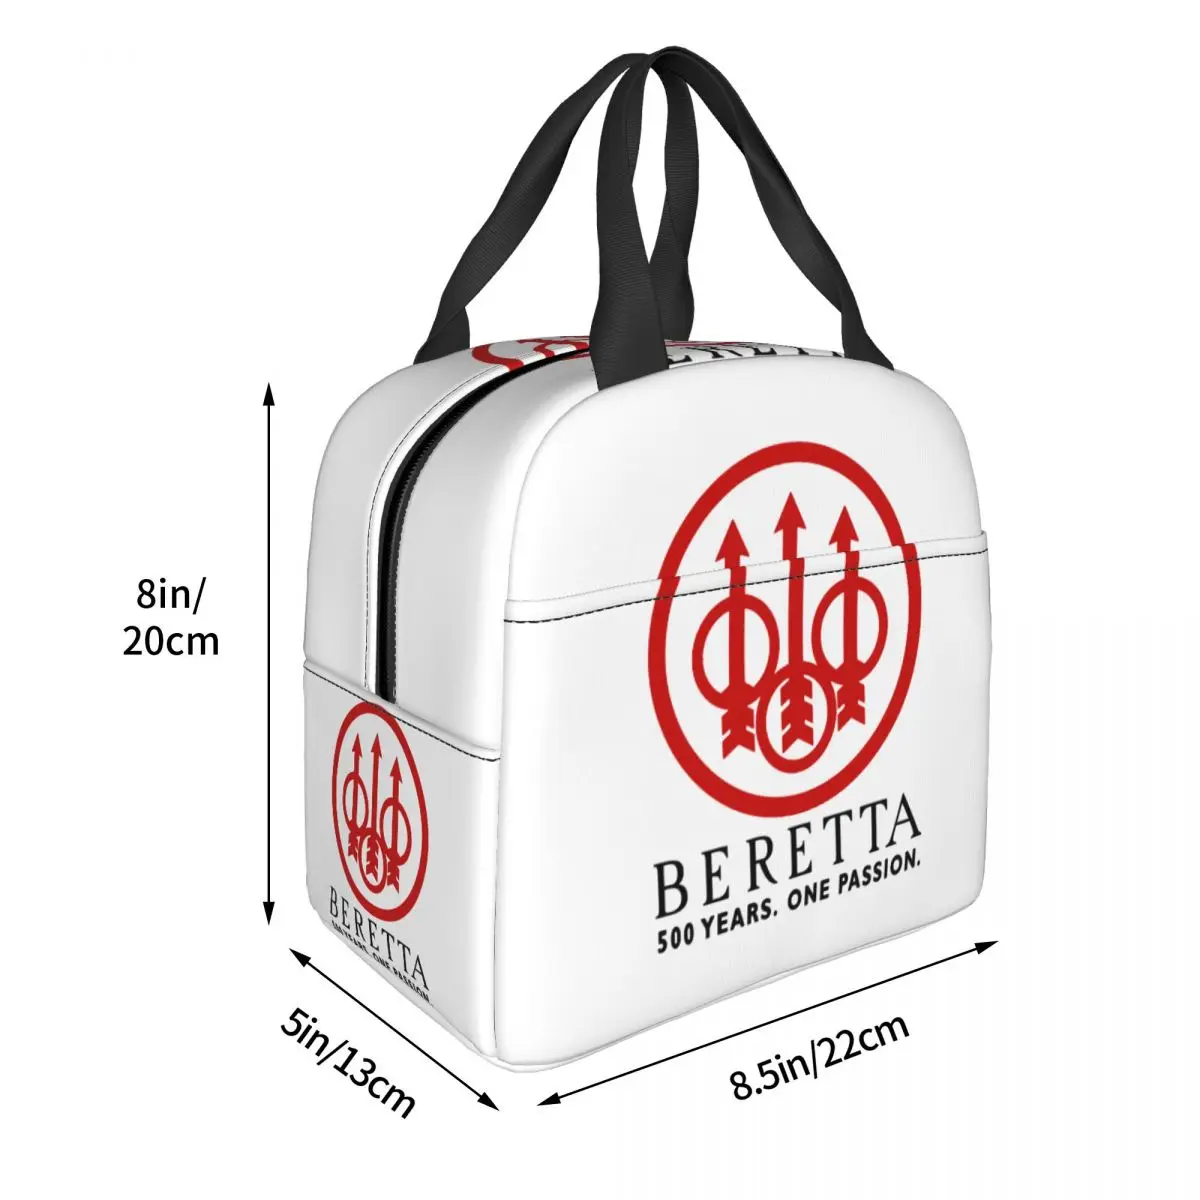 https://ae01.alicdn.com/kf/S4b50564383b34143a486867e9cddc2b25/Custom-Beretta-Lunch-Bag-Cooler-Thermal-Insulated-Lunch-Boxes-for-Women-Children-School-Work-Picnic-Food.jpg